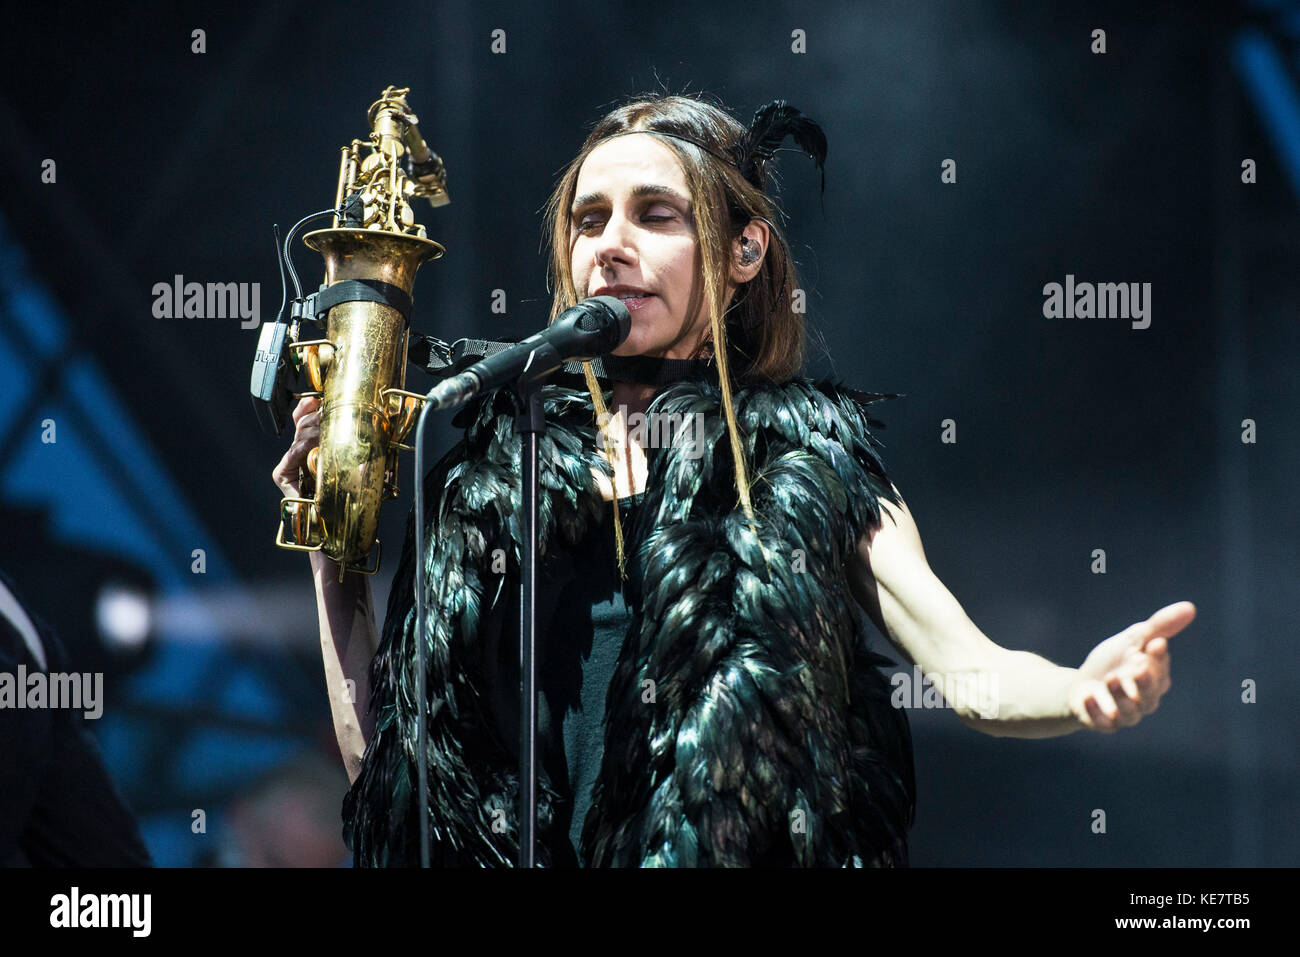 Turin,Italy-August 25, 2017: PJ Harvey performs live at the Todays festival on August 25, 2017 in Turin, Italy Stock Photo